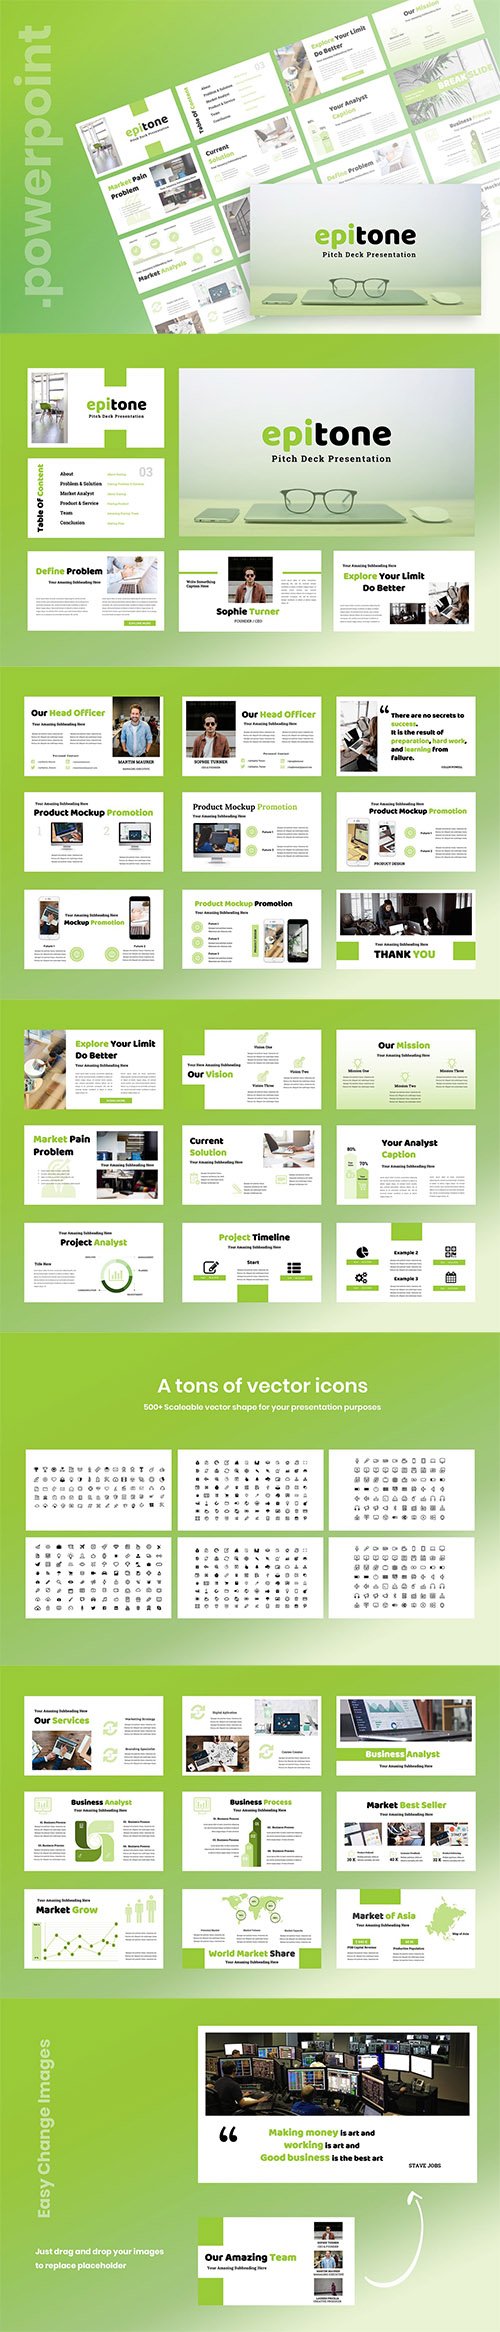 Epitone - Pitch Deck Powerpoint, Keynote and Google Slides Templates